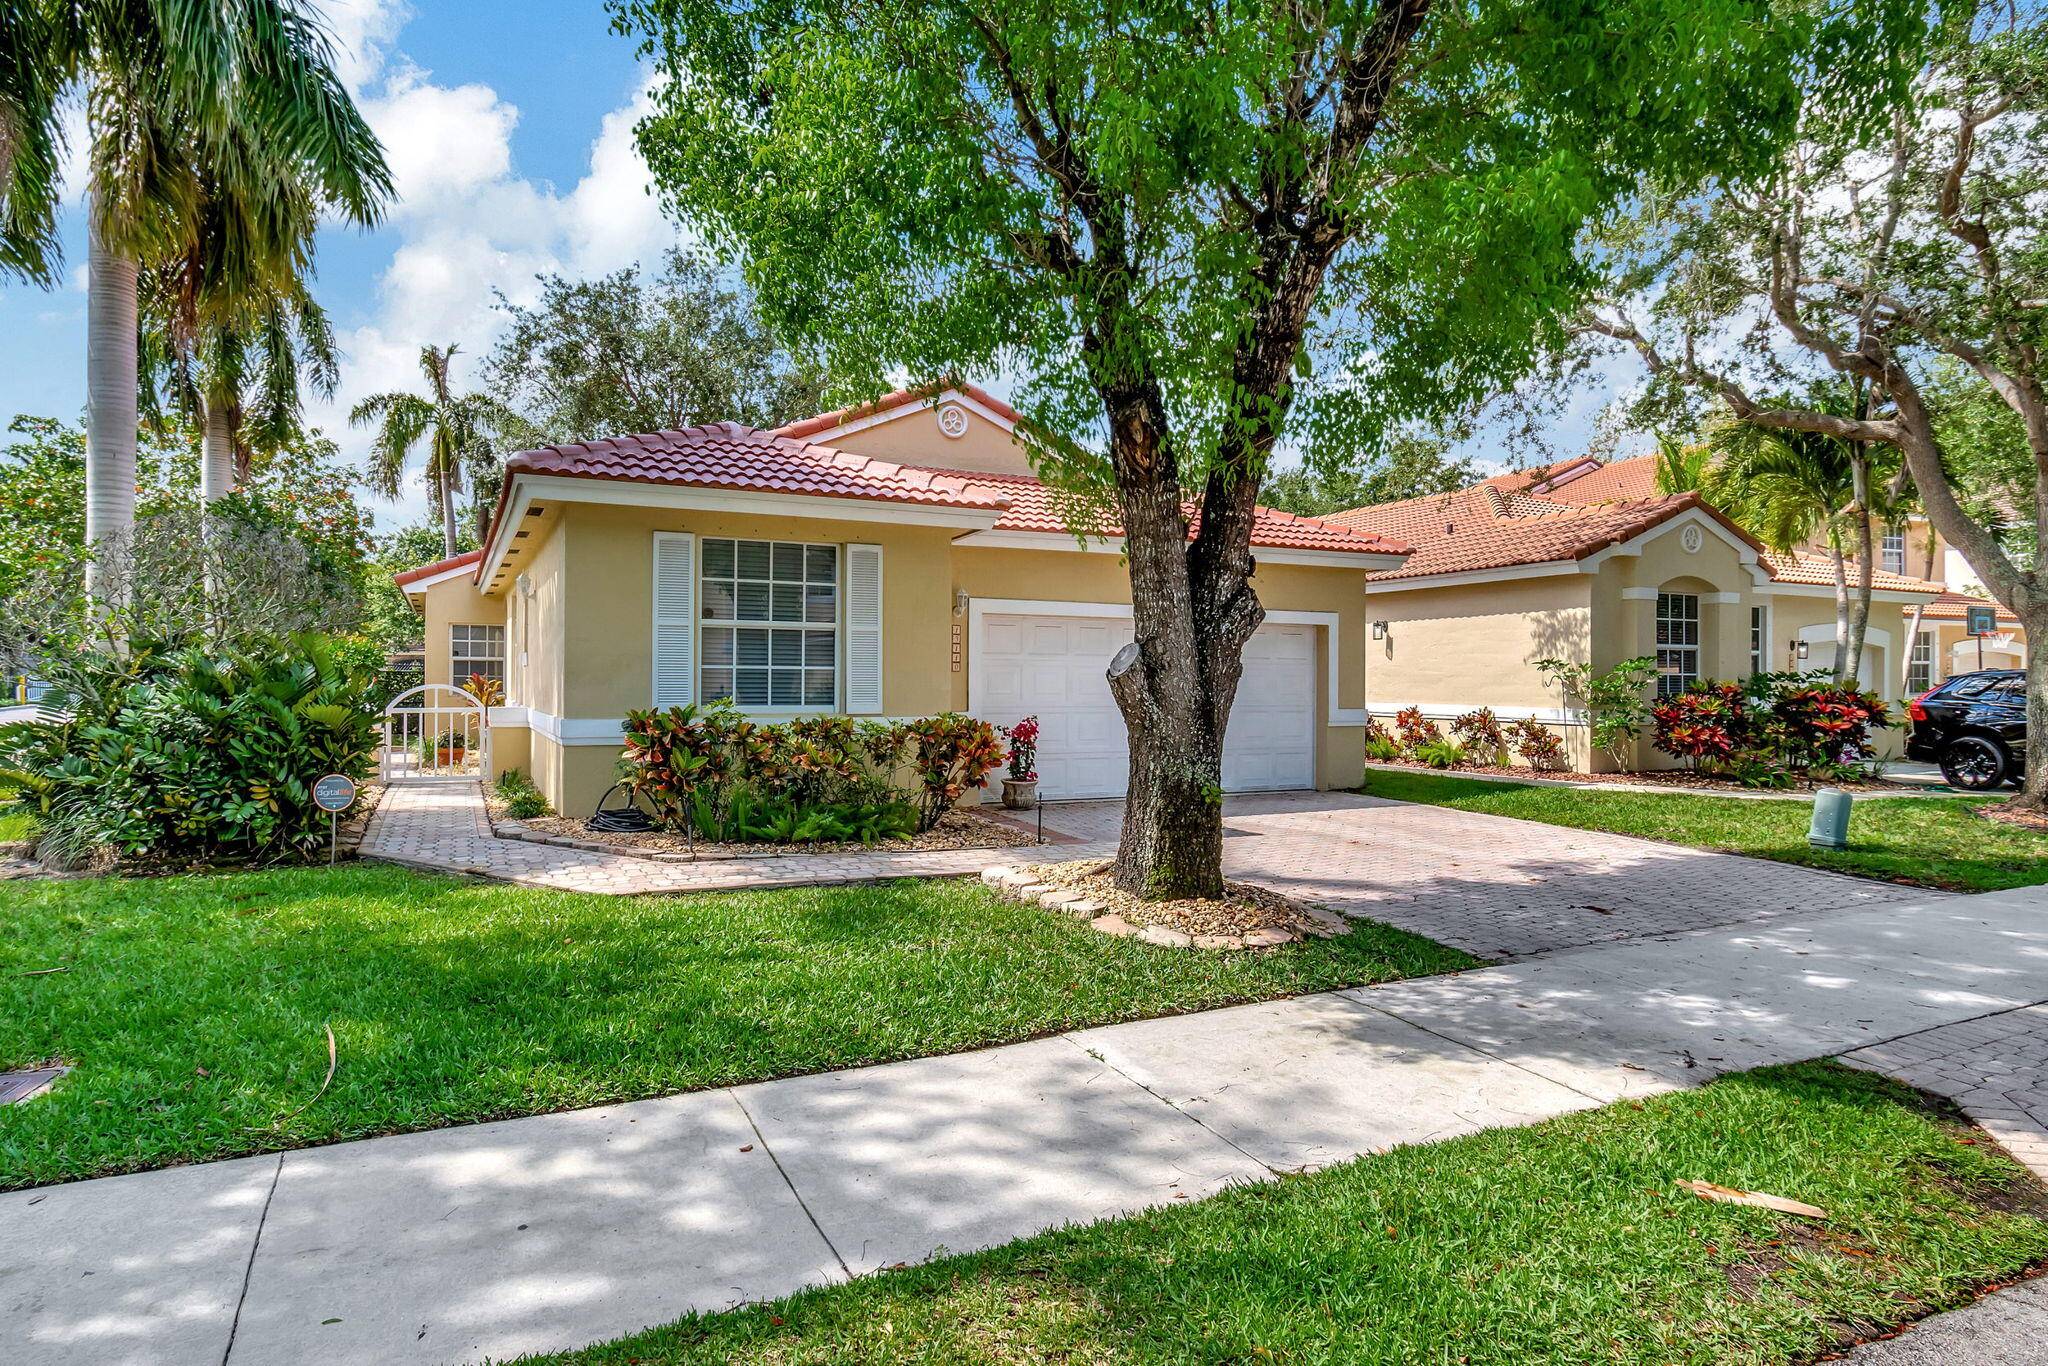 Welcome home to this beautifully maintained single family residence in Davie.